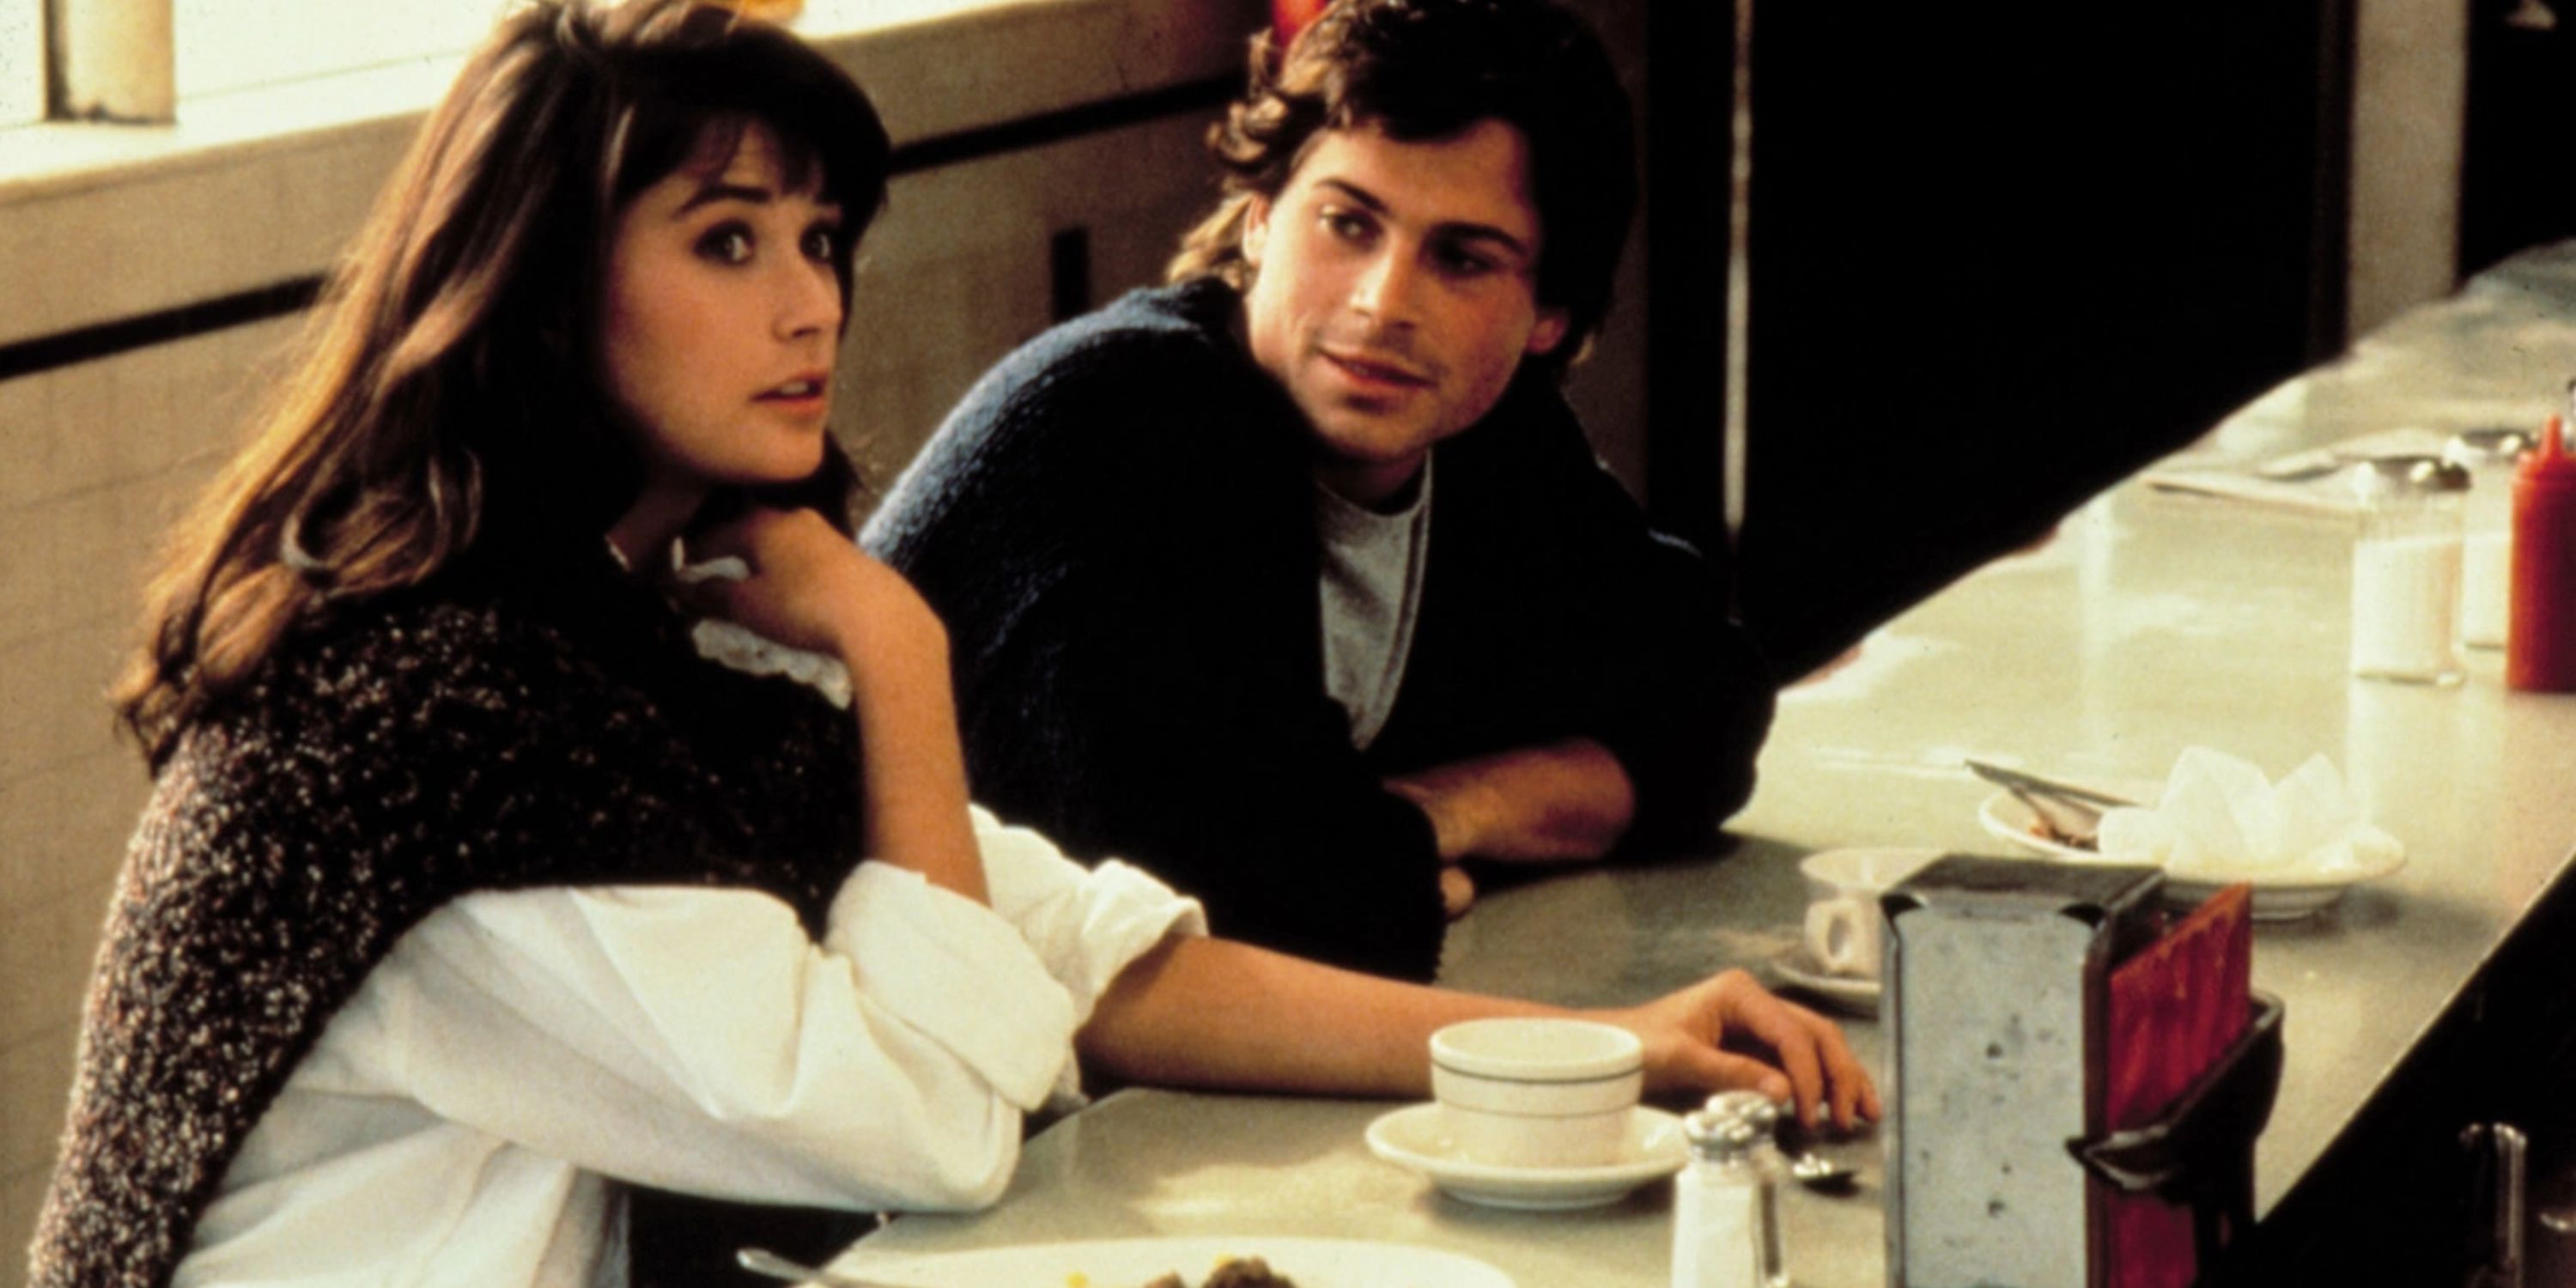 10 brat pack movies - About Last Night starring Demi Moore and Rob Lowe as the main couple